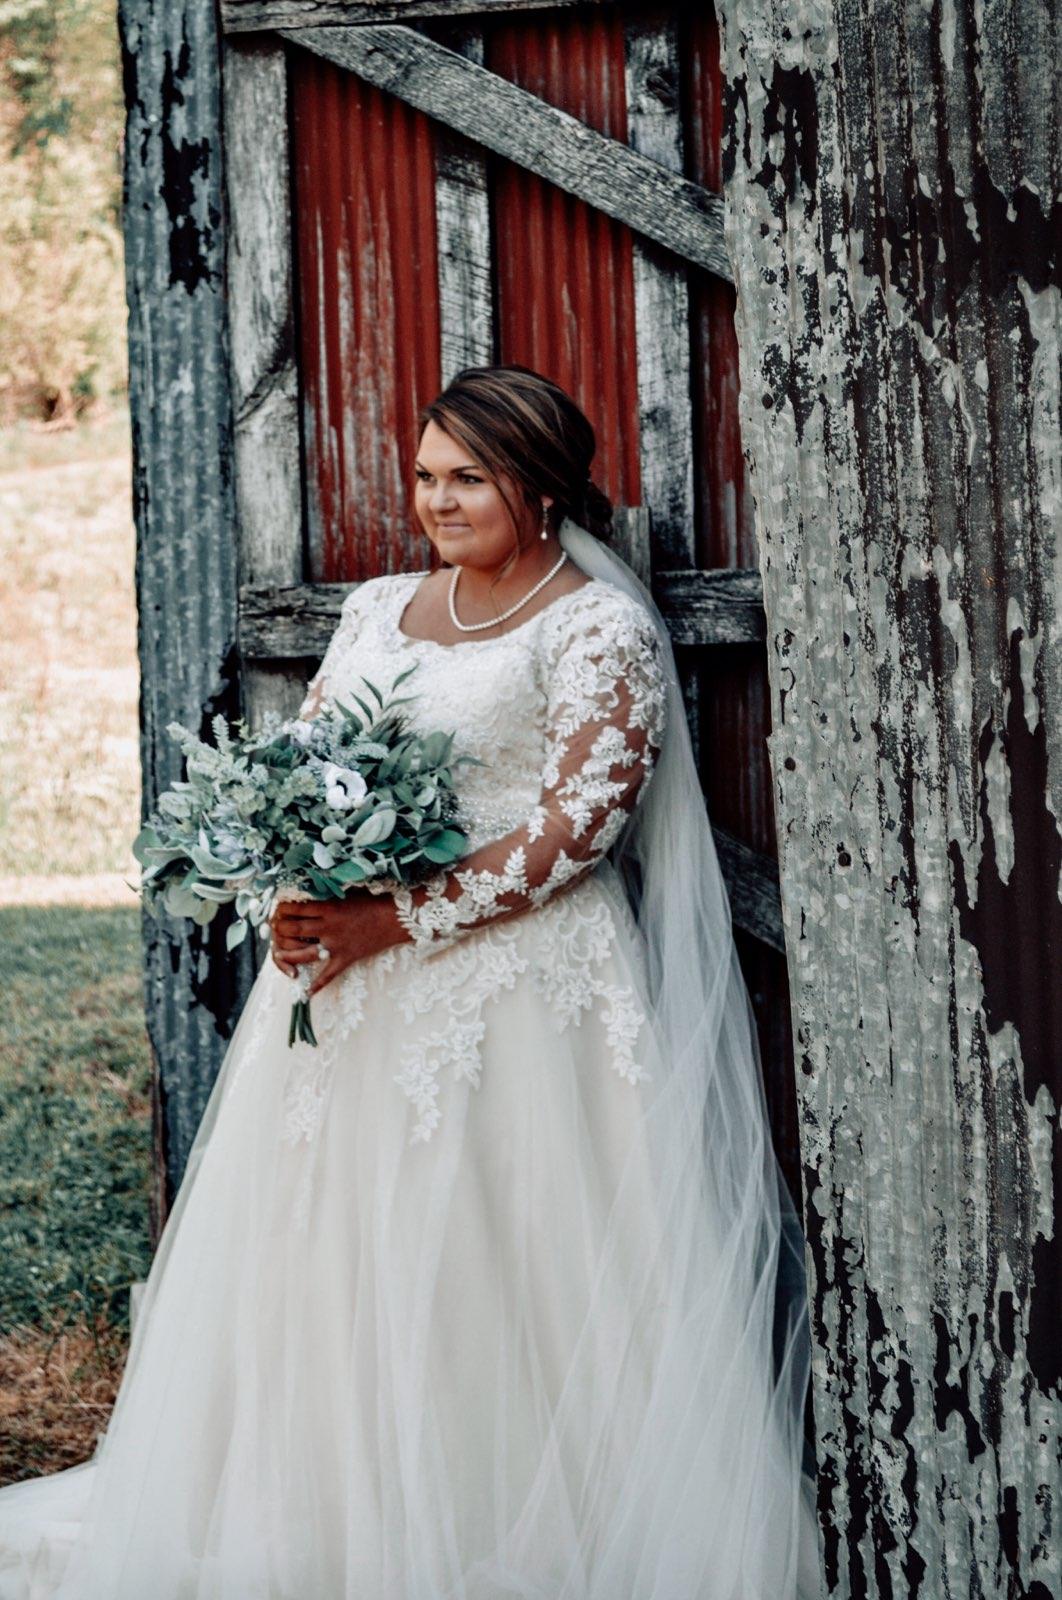 Kelsey, Our featured bride